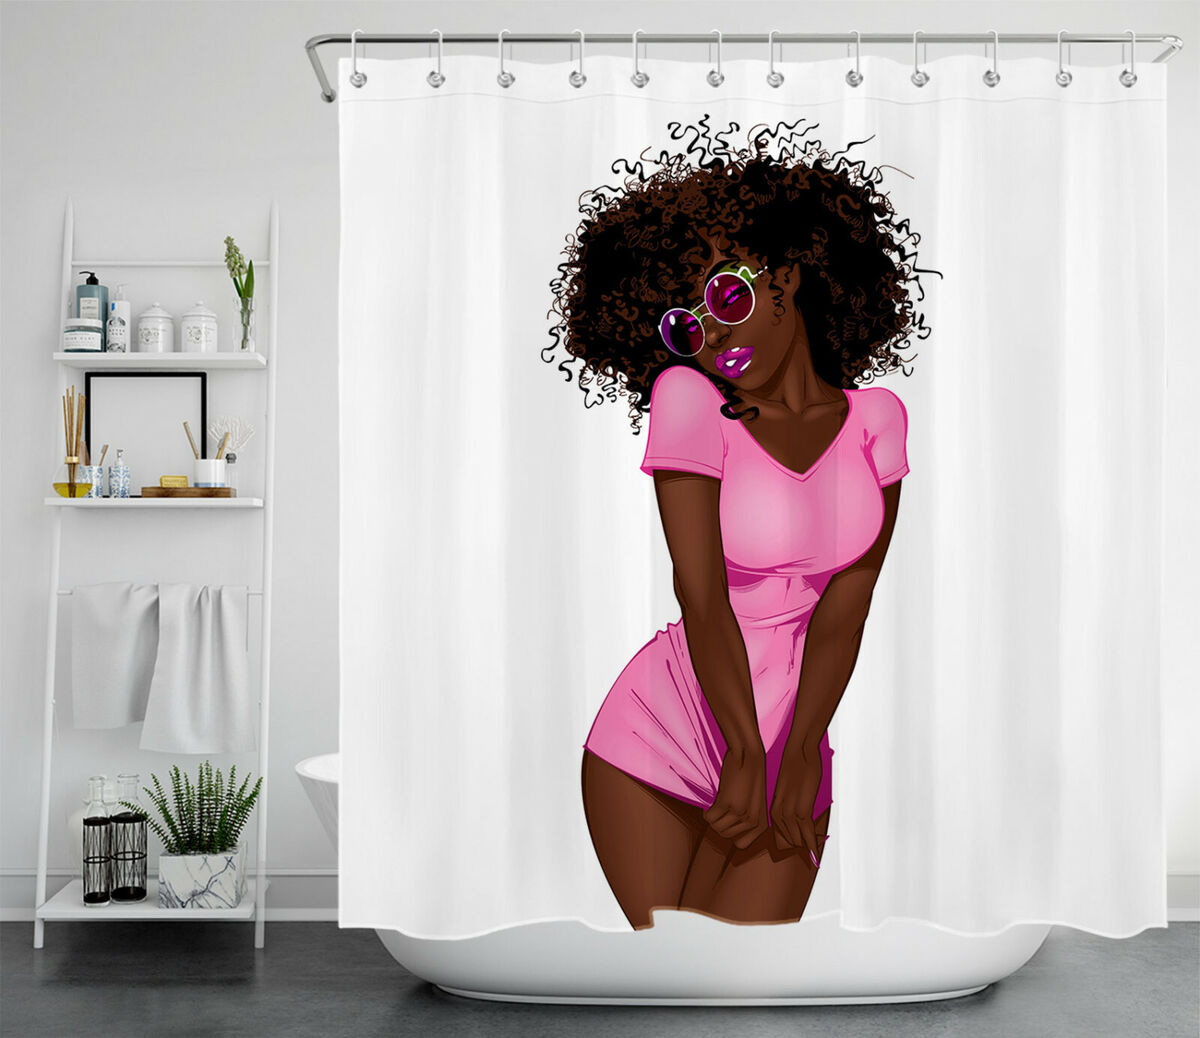 anna templeton recommends Hot Black Girl In Shower